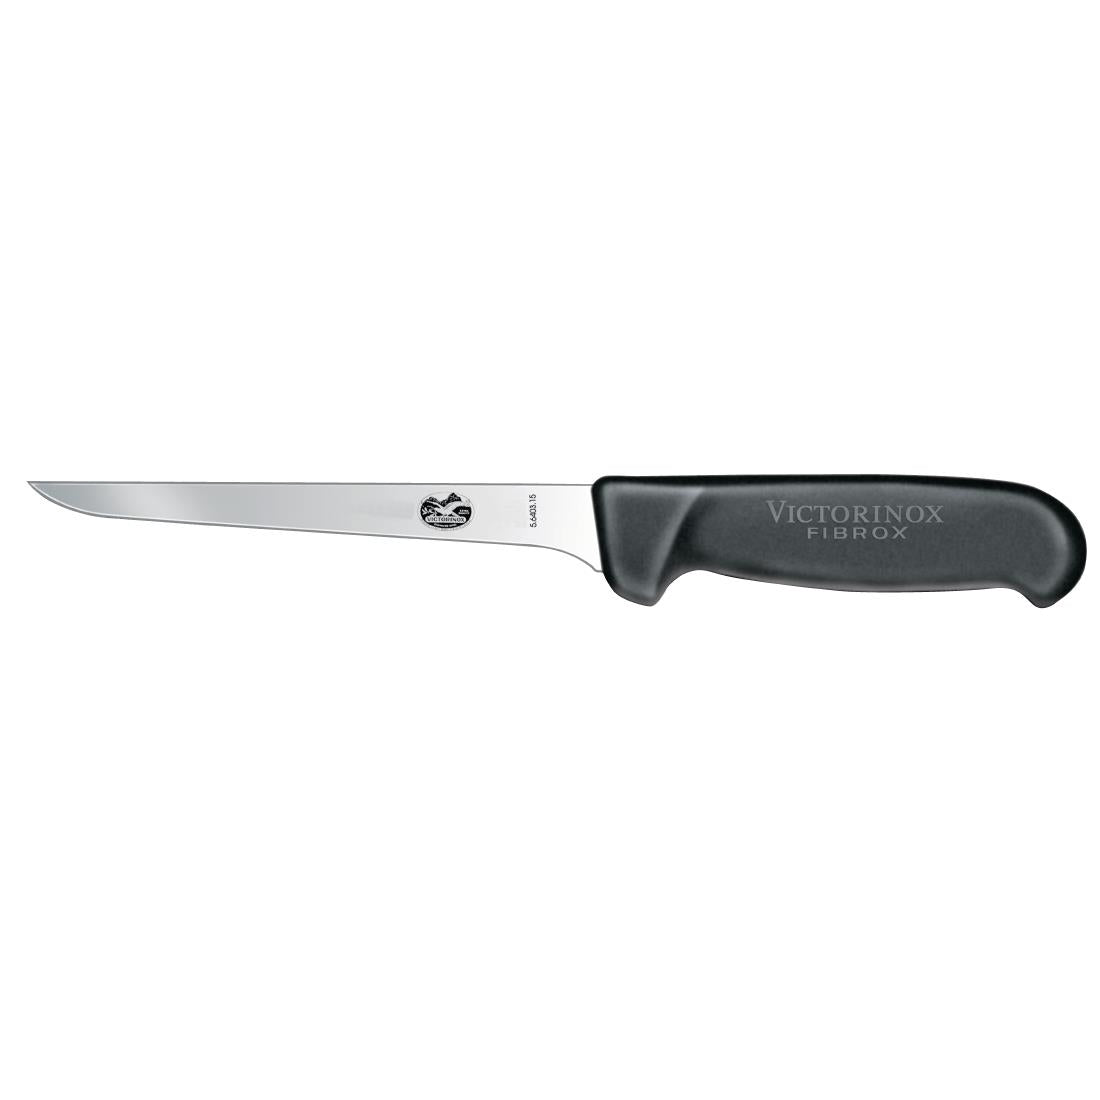 F221 Victorinox 21.5cm Chefs Knife with Hygiplas and Vogue Knife Set